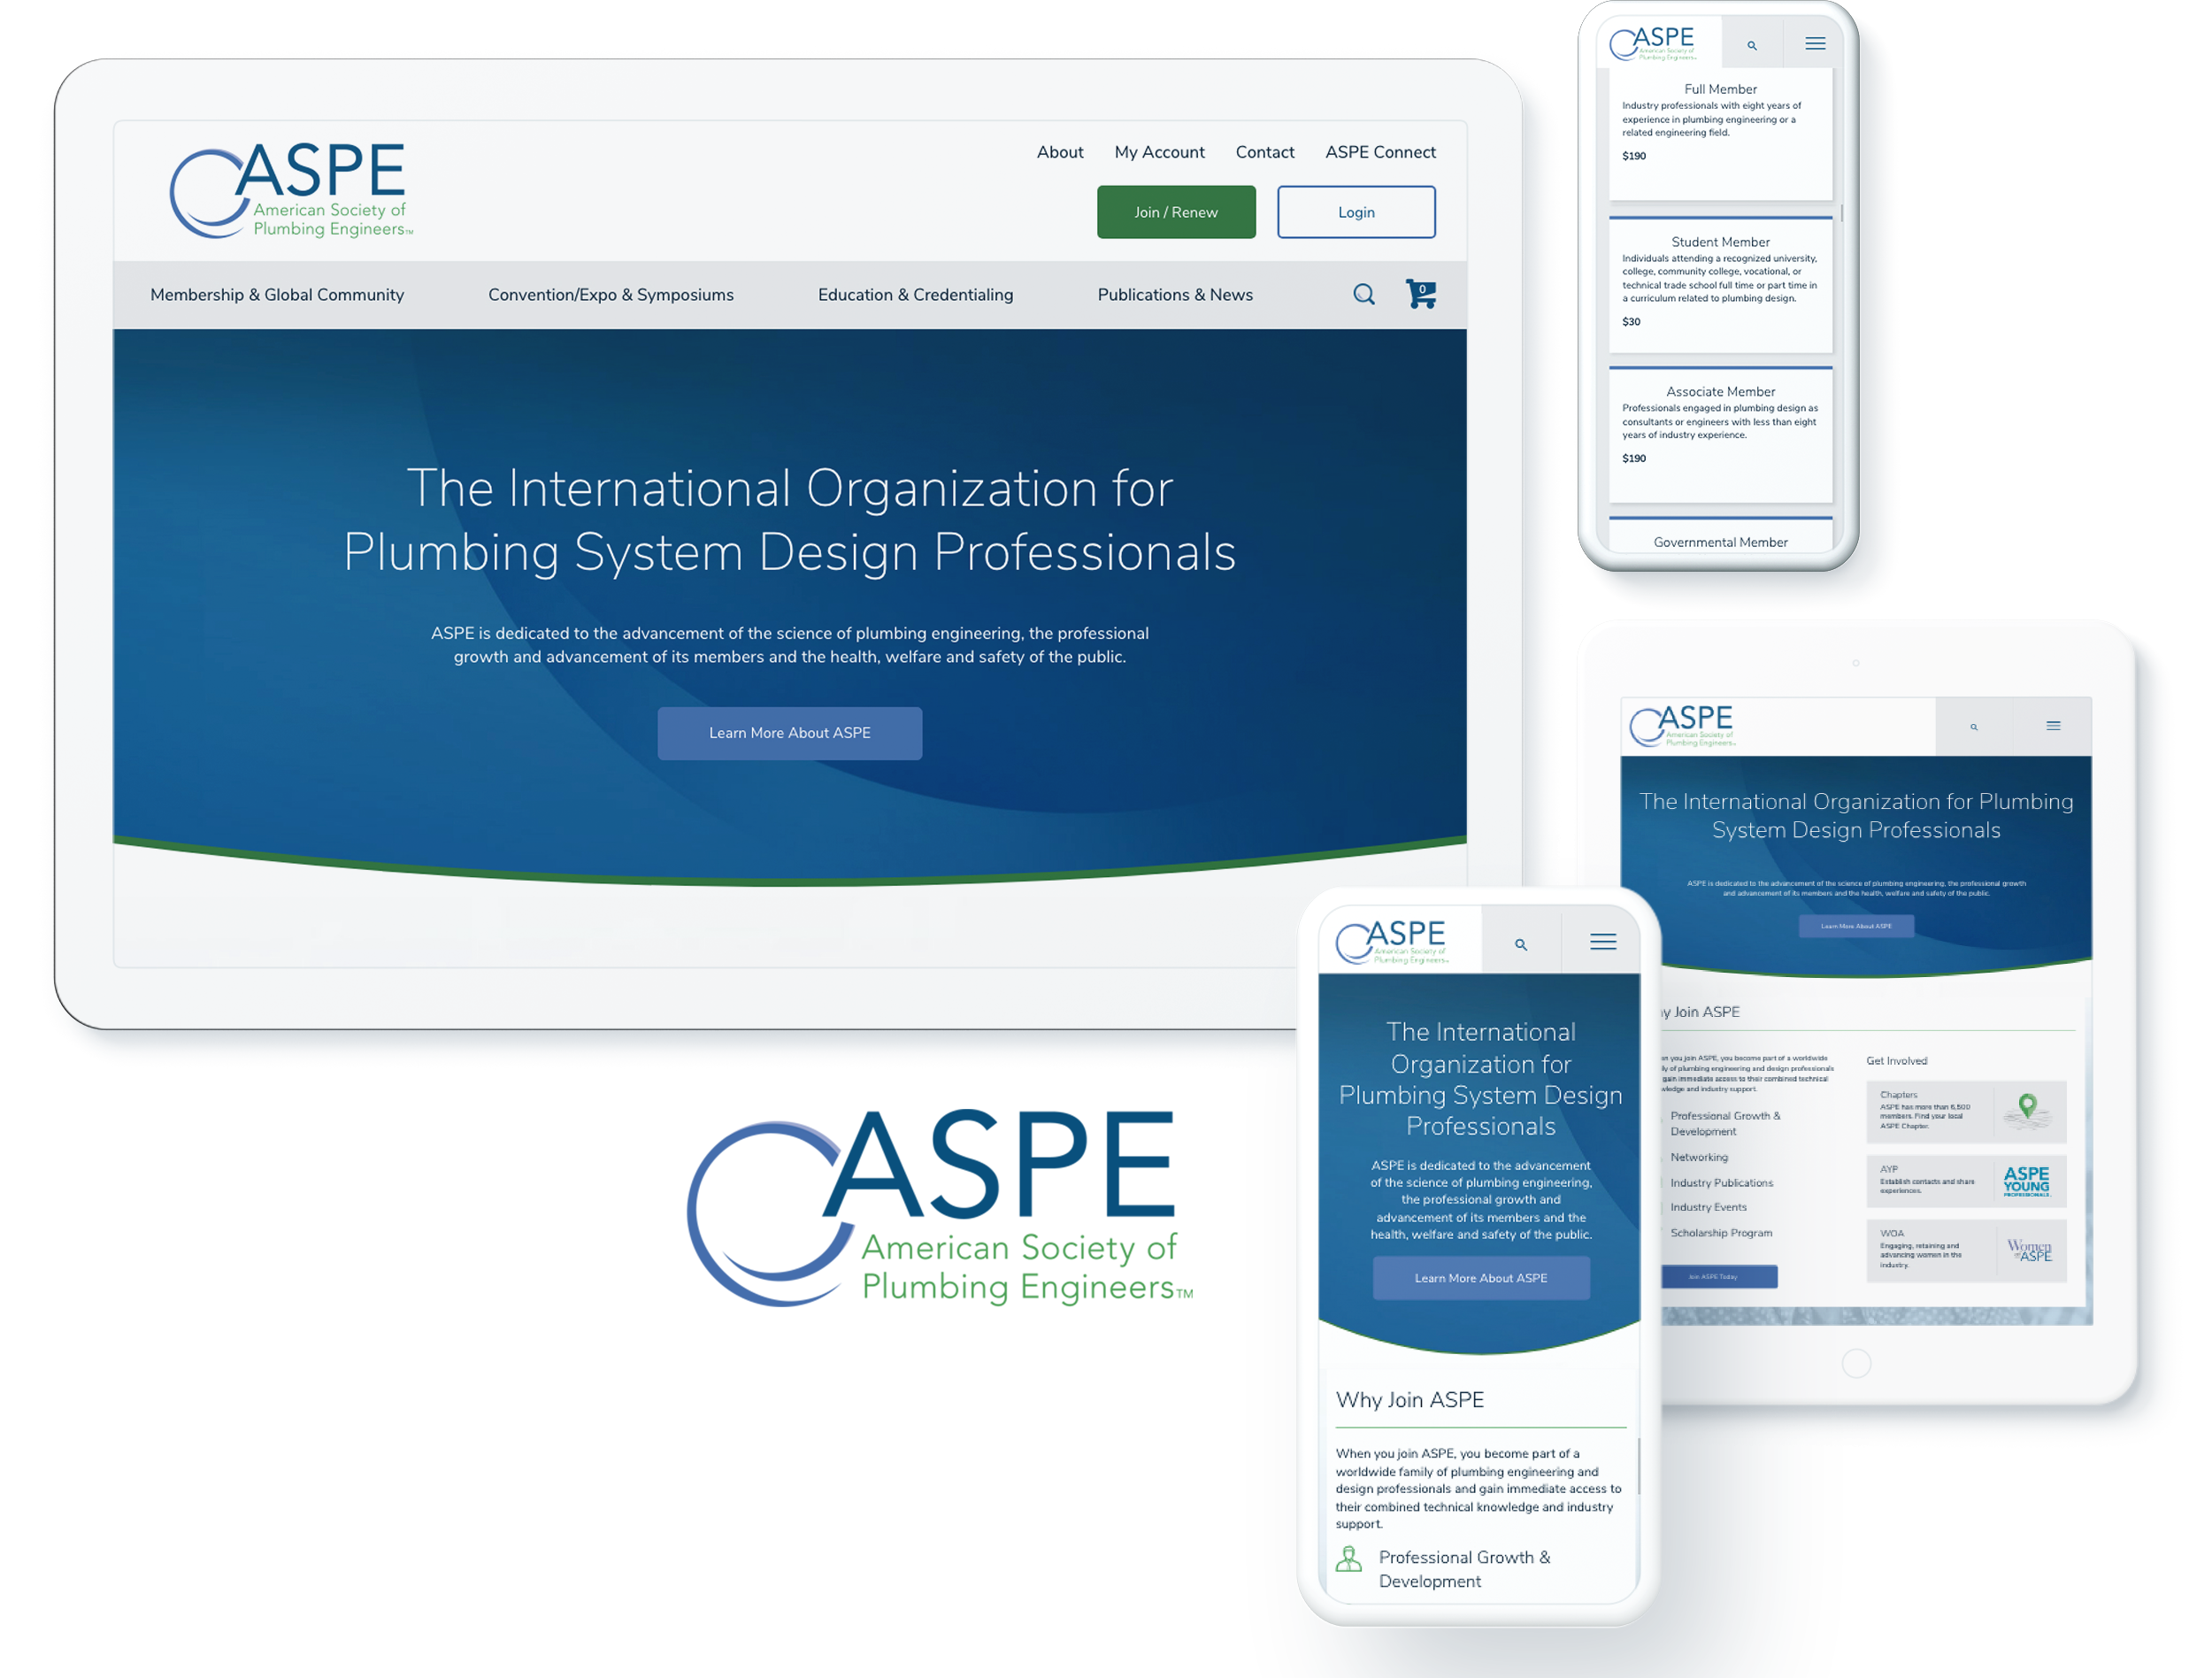 ASPE devices